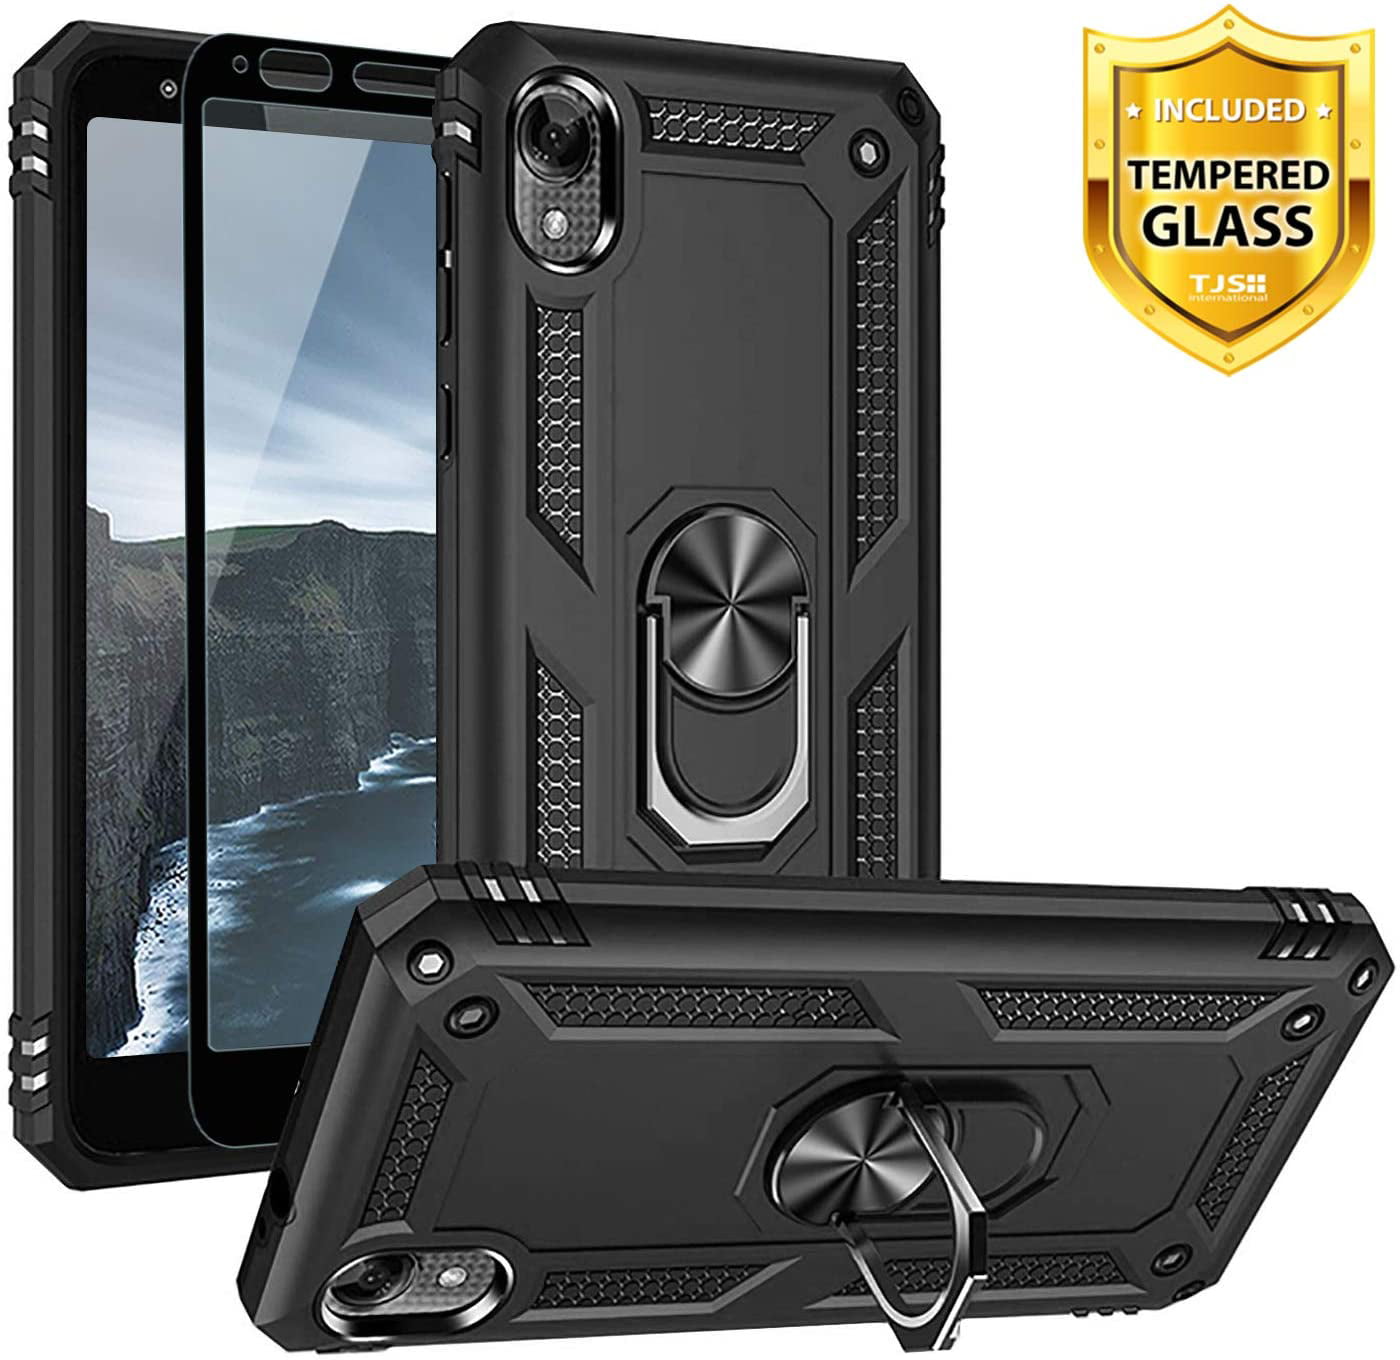 TJS Phone Case for Motorola Moto E6, [Full Coverage Tempered Glass Screen Protector][Impact Resistant][Defender][Metal Ring][Magnetic][Support] Heavy Duty Armor Phone Cover (Black)